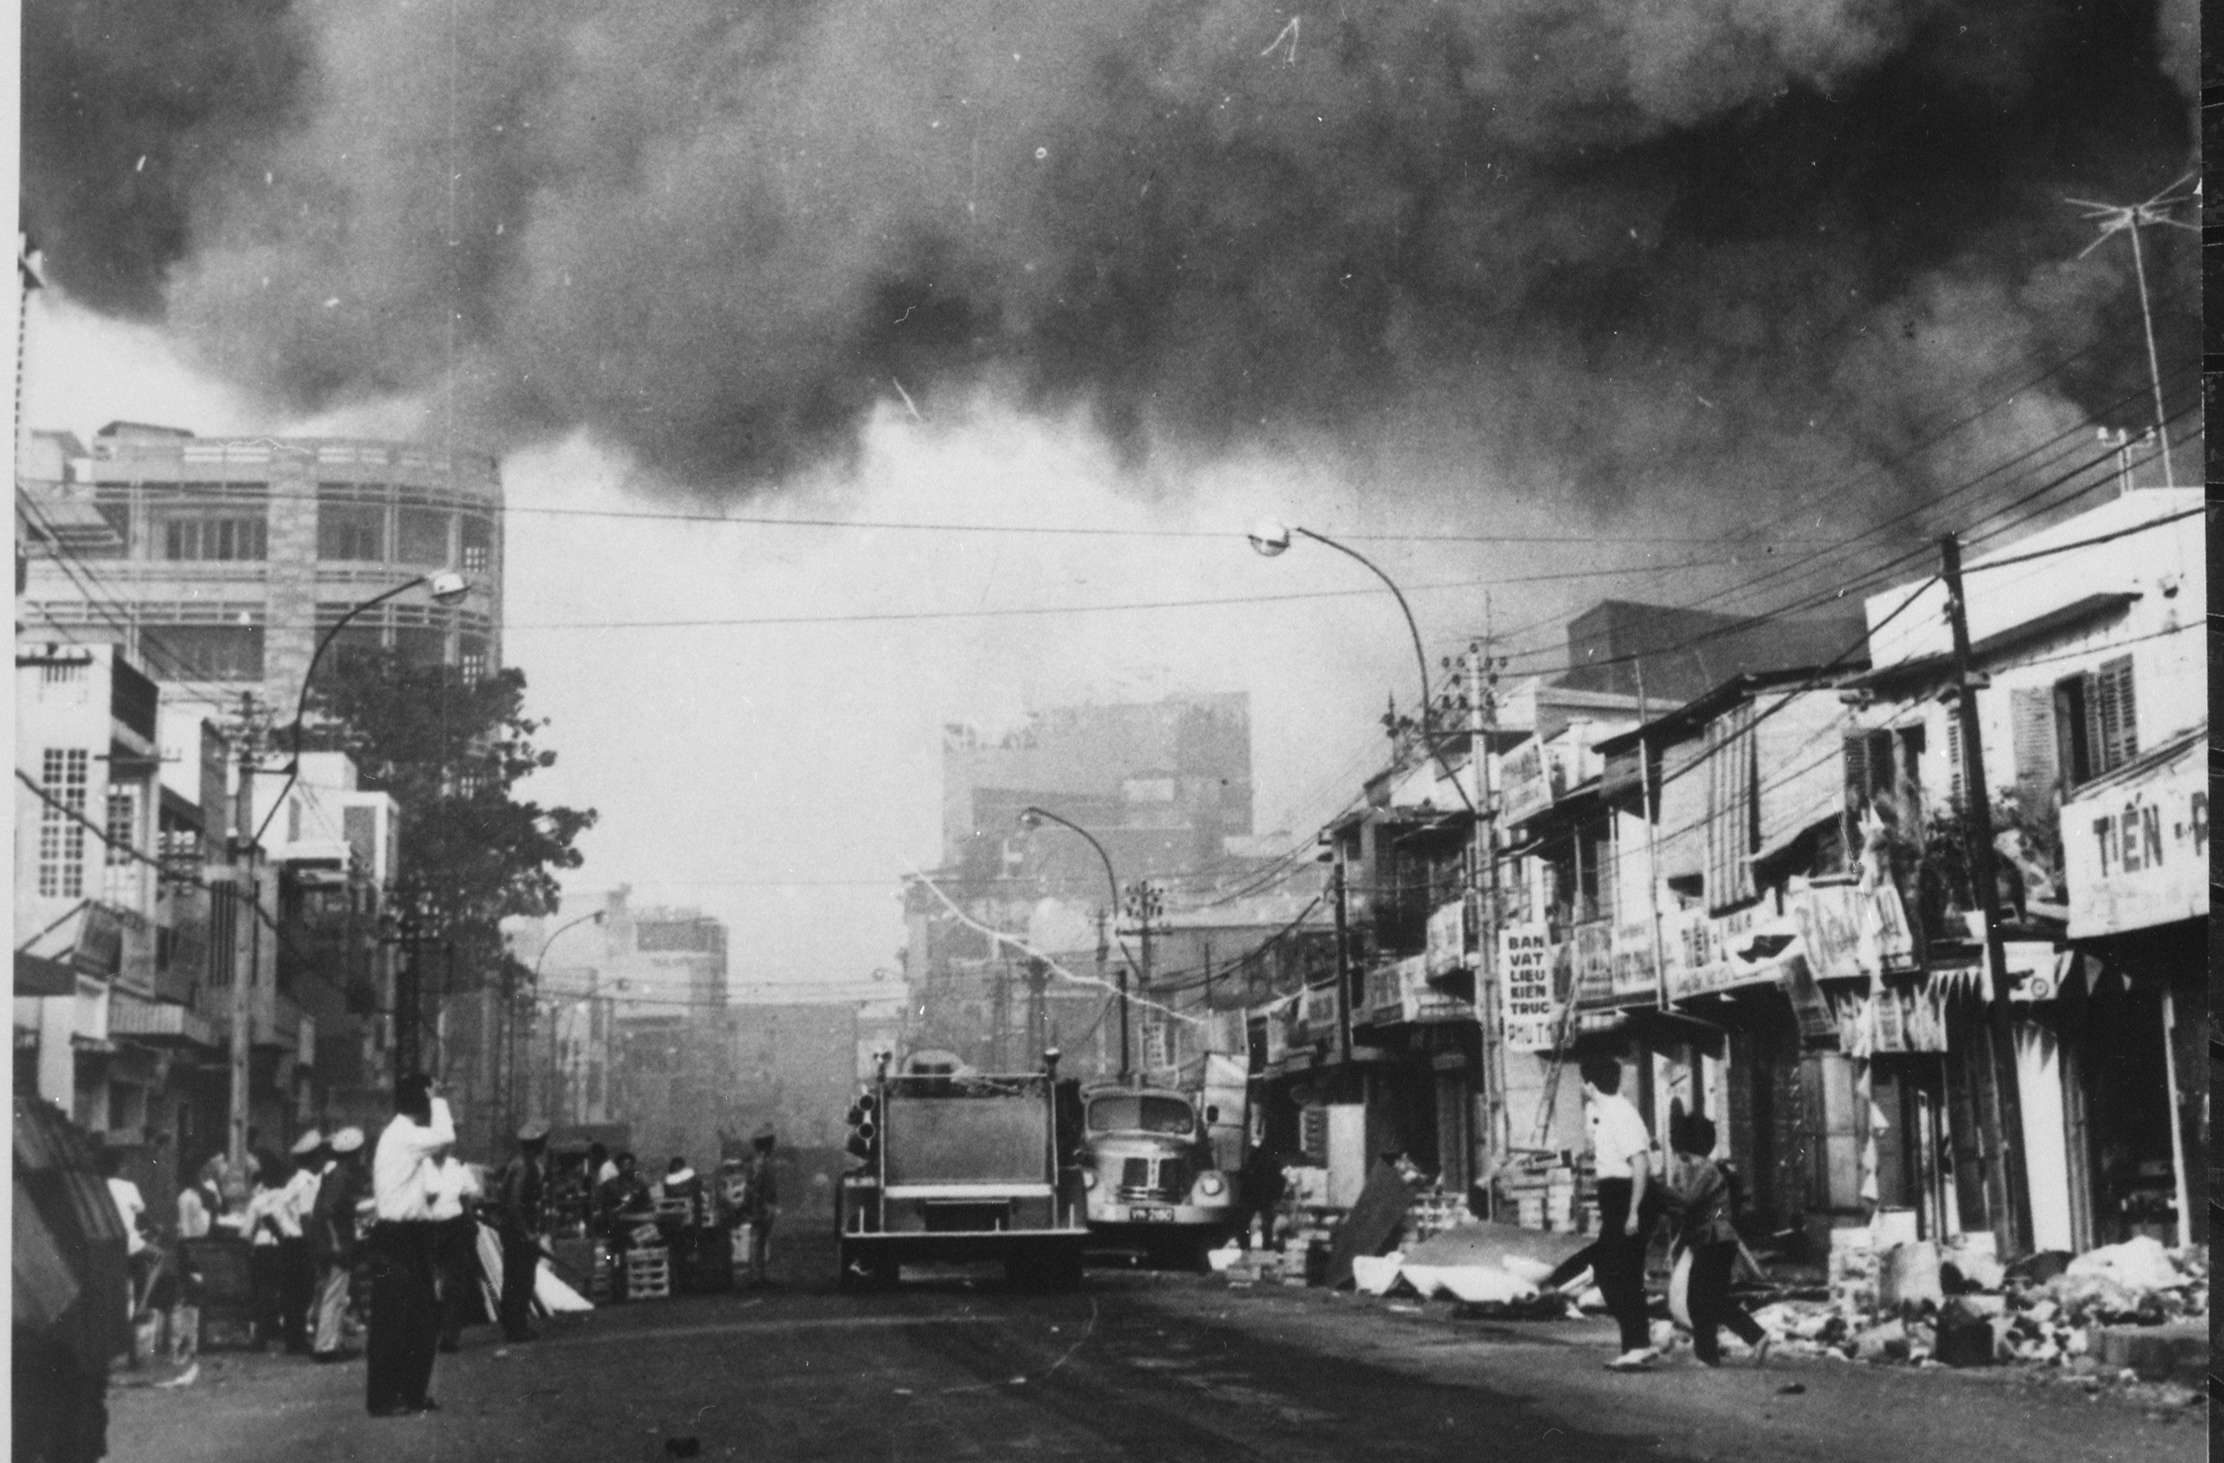 Black Smoke Covers the Capital City During Attacks by the Viet Cong